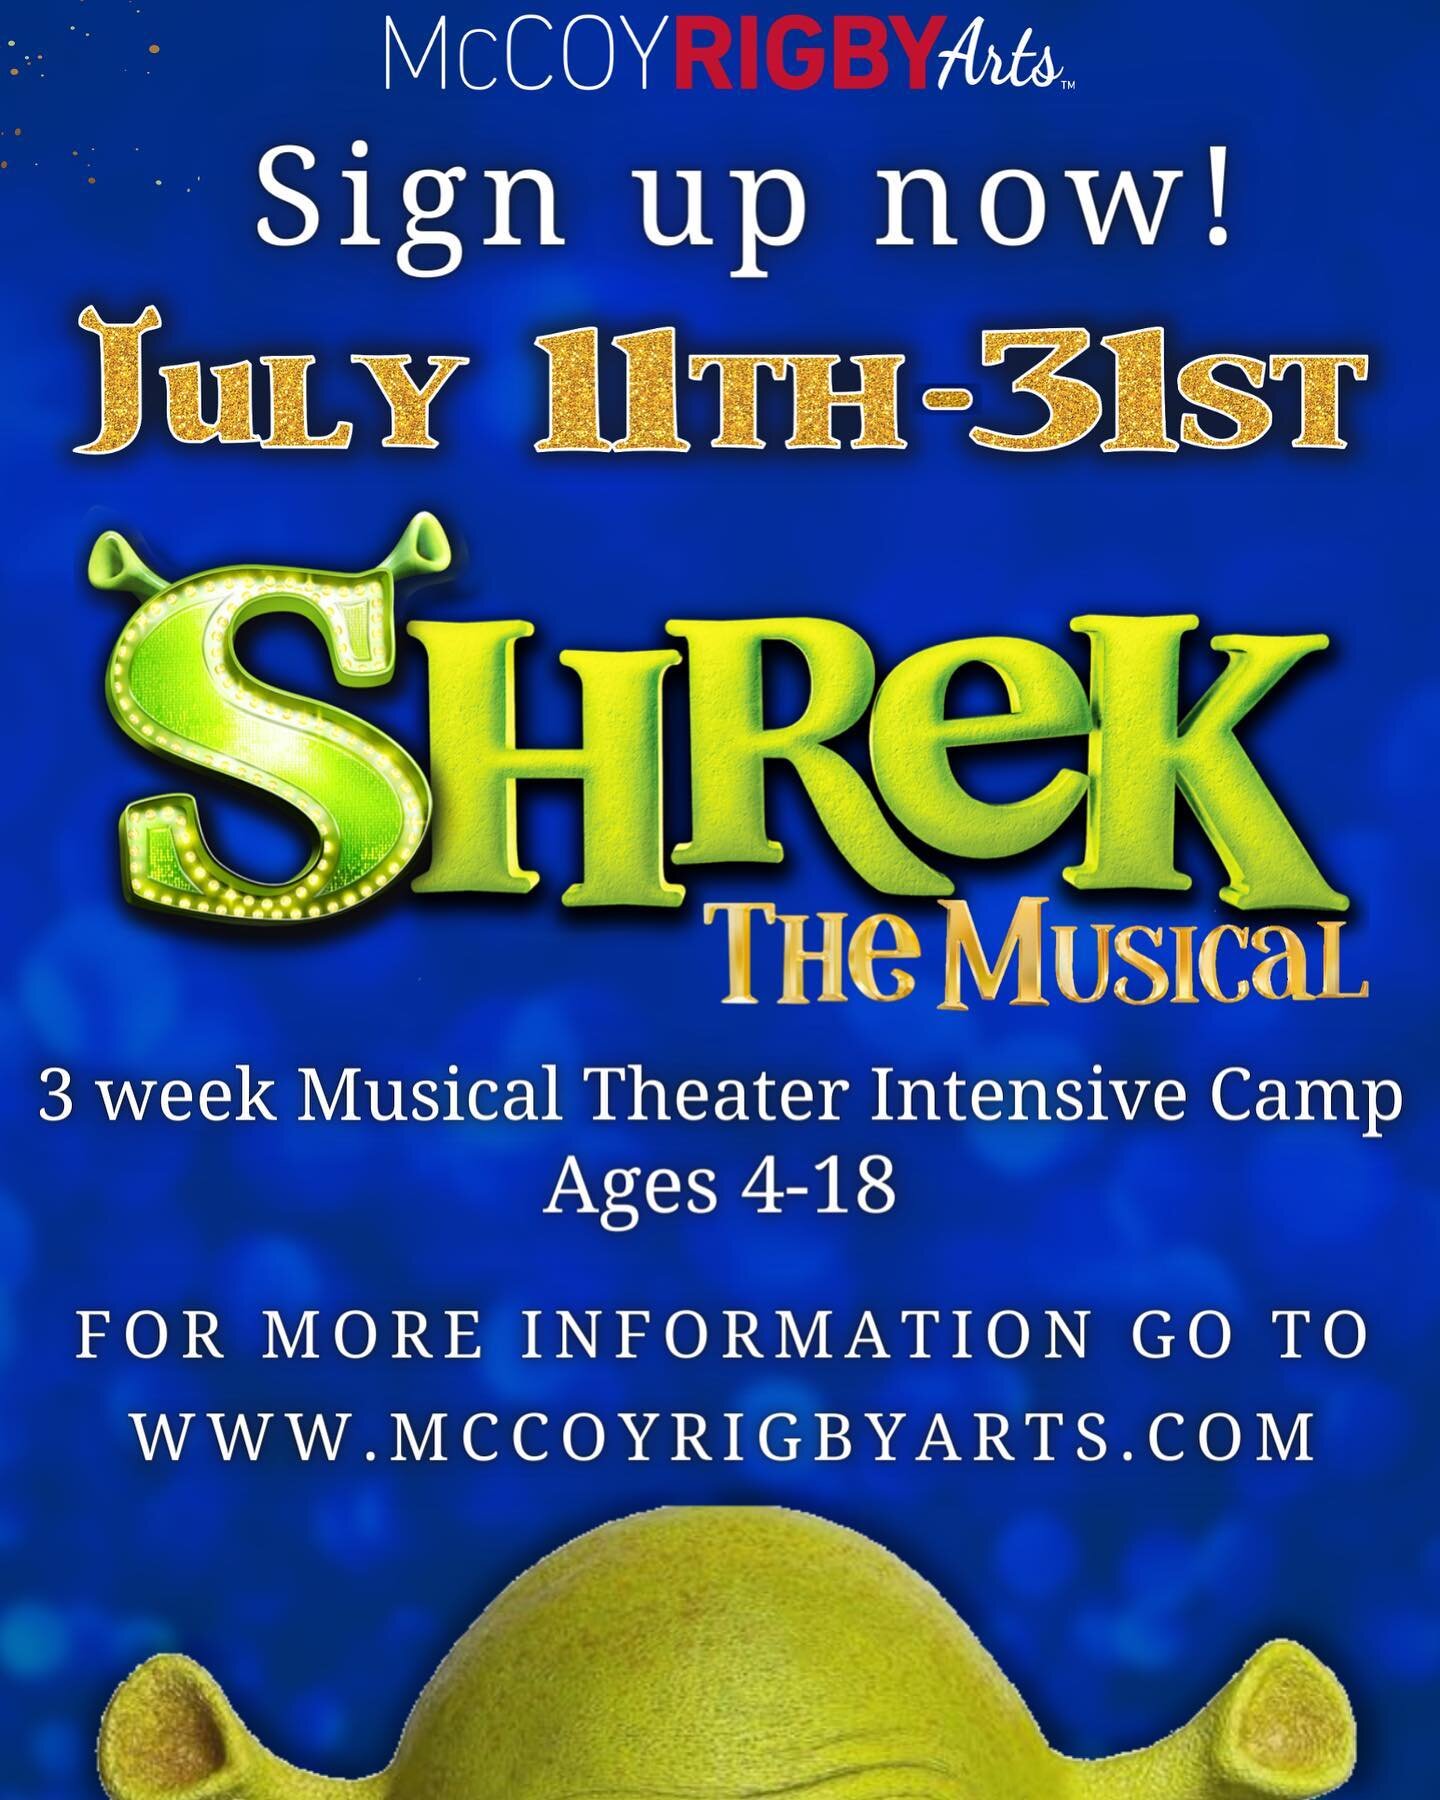 Don&rsquo;t miss out!! Auditions are June 11th! LINK IN BIO!! 
.
Director- Lindsay brooks @lindsaybrooks
.
Choreographer-Sharie Nitkin @sheshiemarie
.
Musical Director- Jenny Schniepp
@ladivajenny